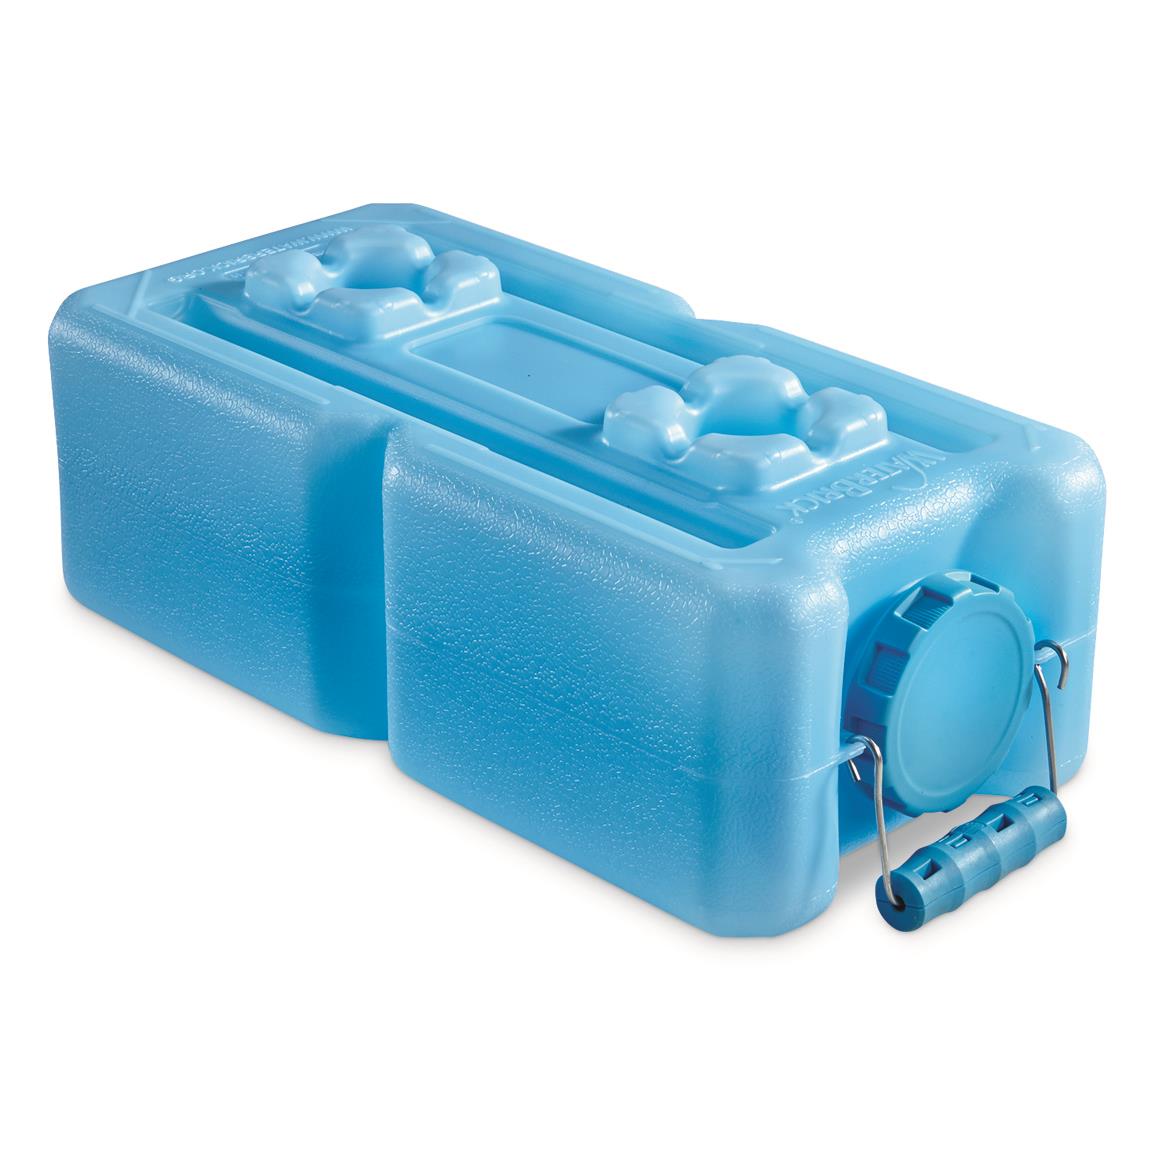 WaterBrick Stackable Water Storage Container, 3.5 Gallon, Blue